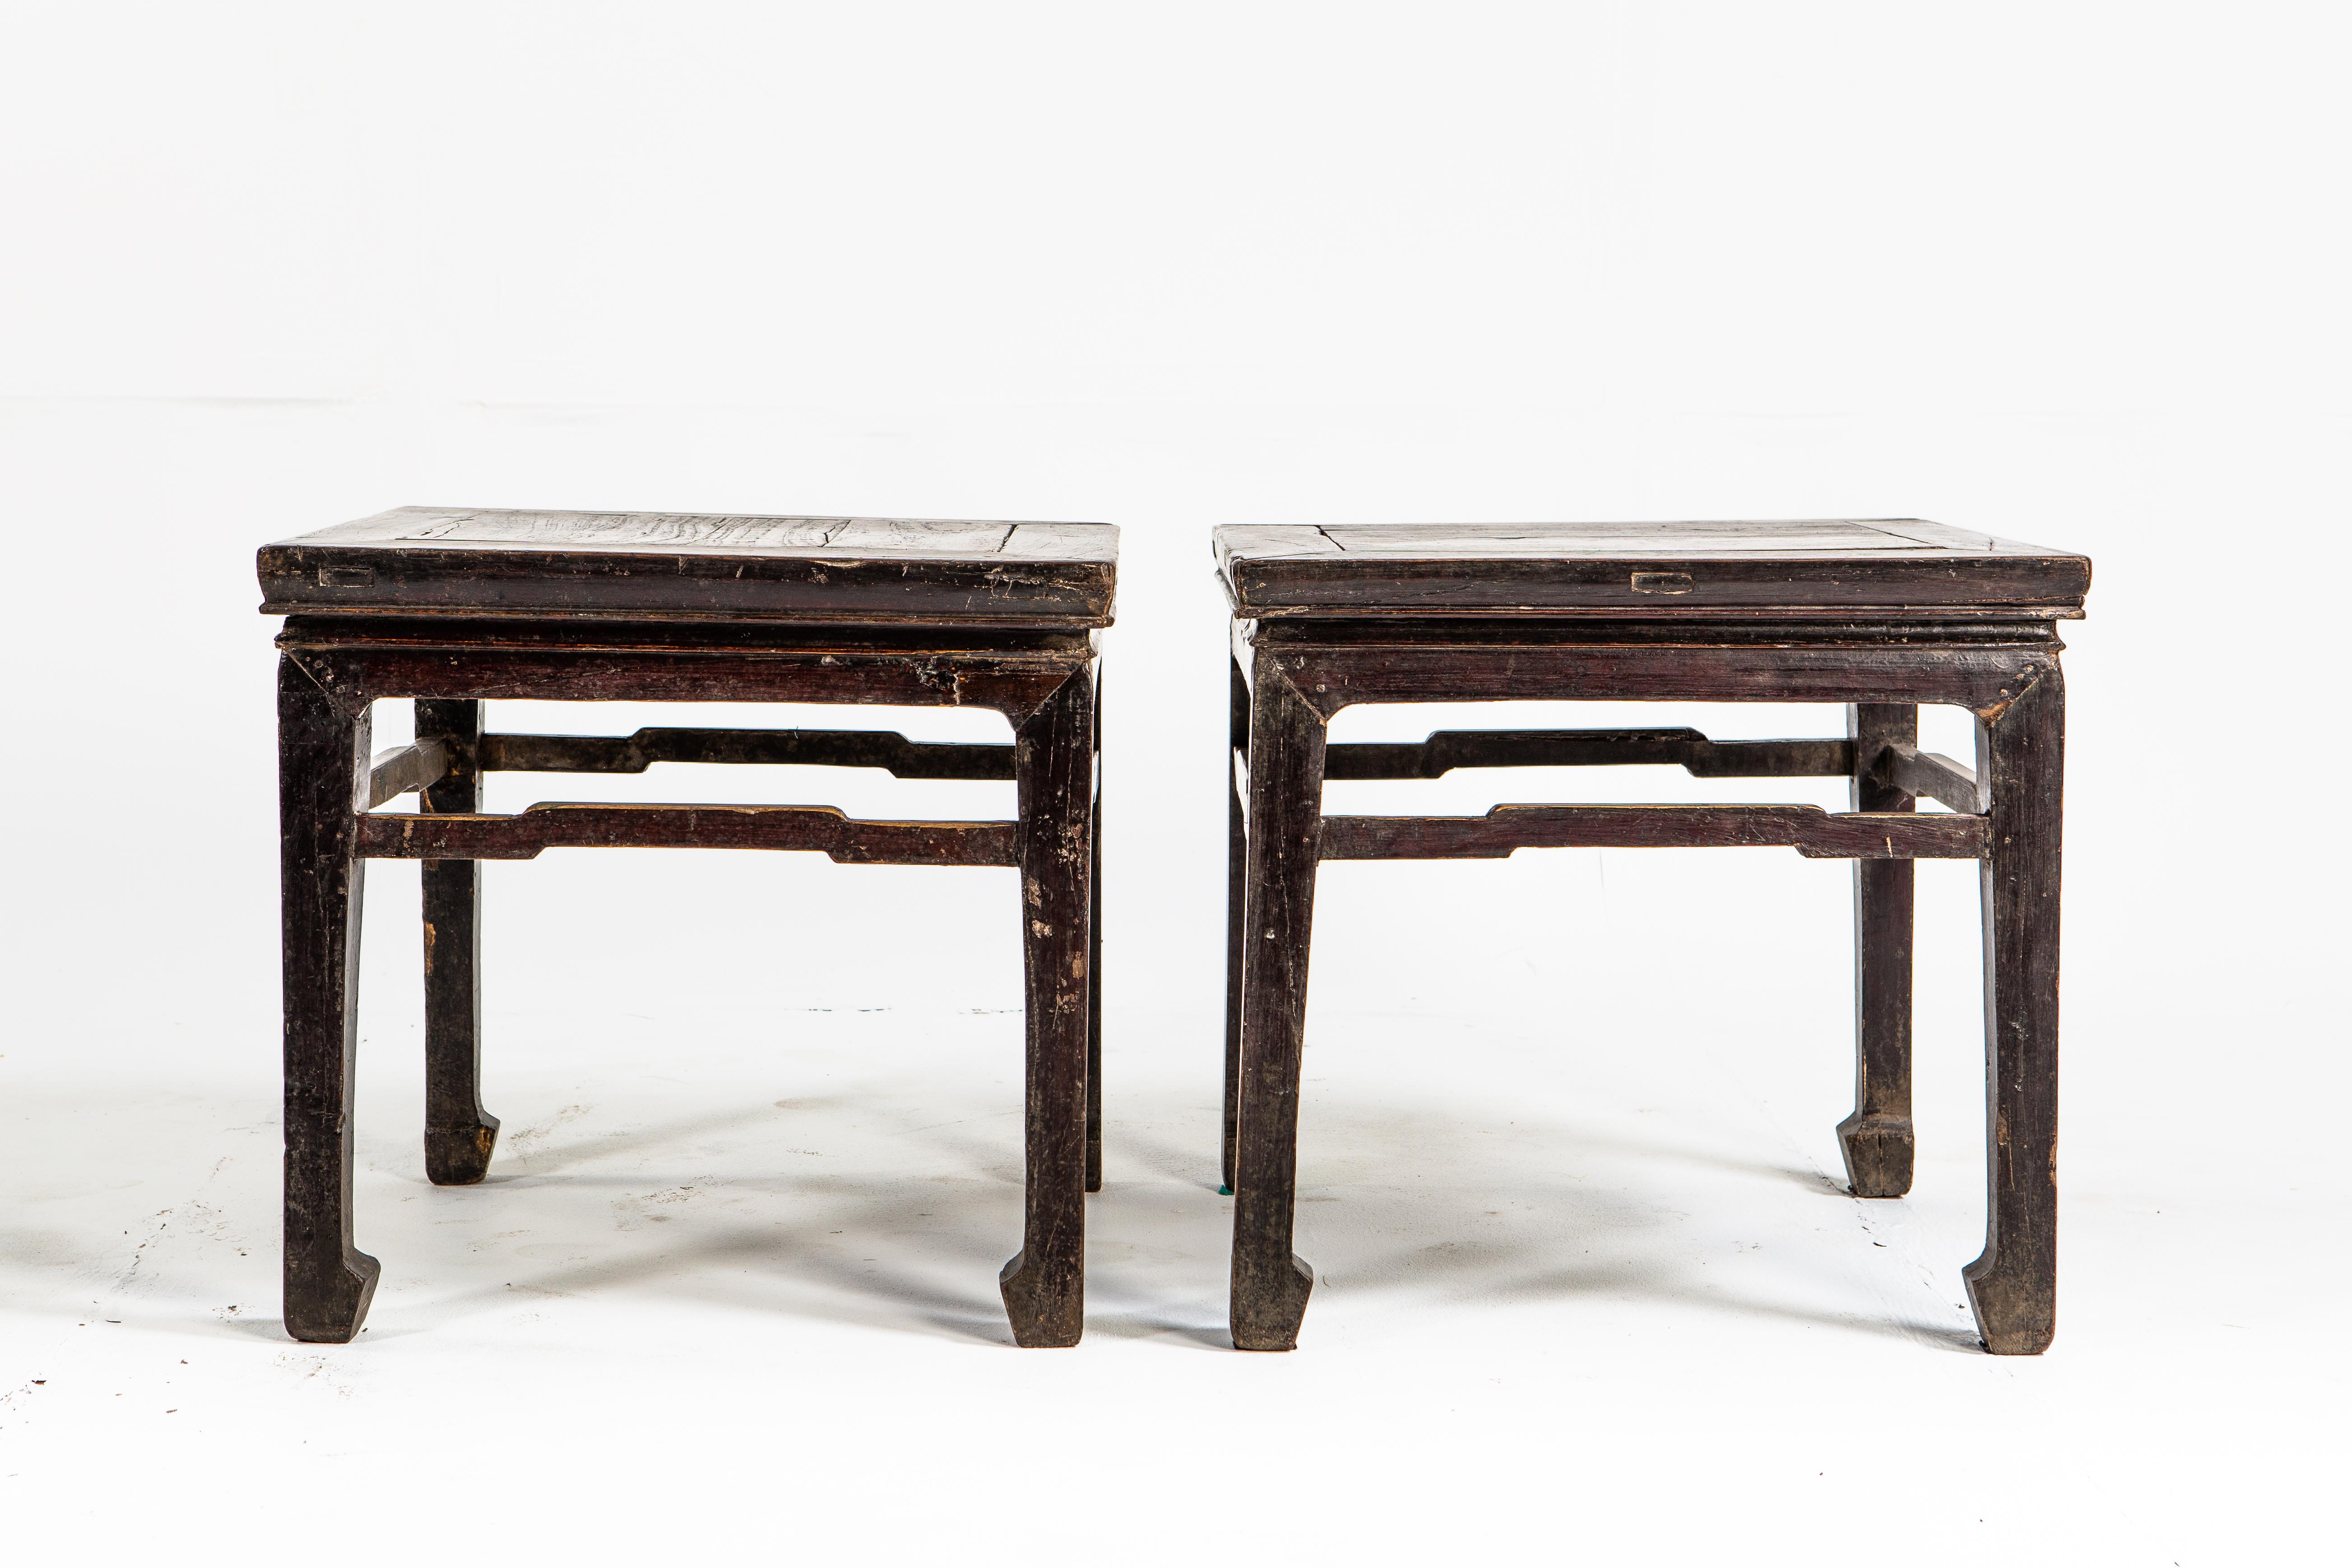 Pair of Qing Dynasty Square Stools (Chinesisch)